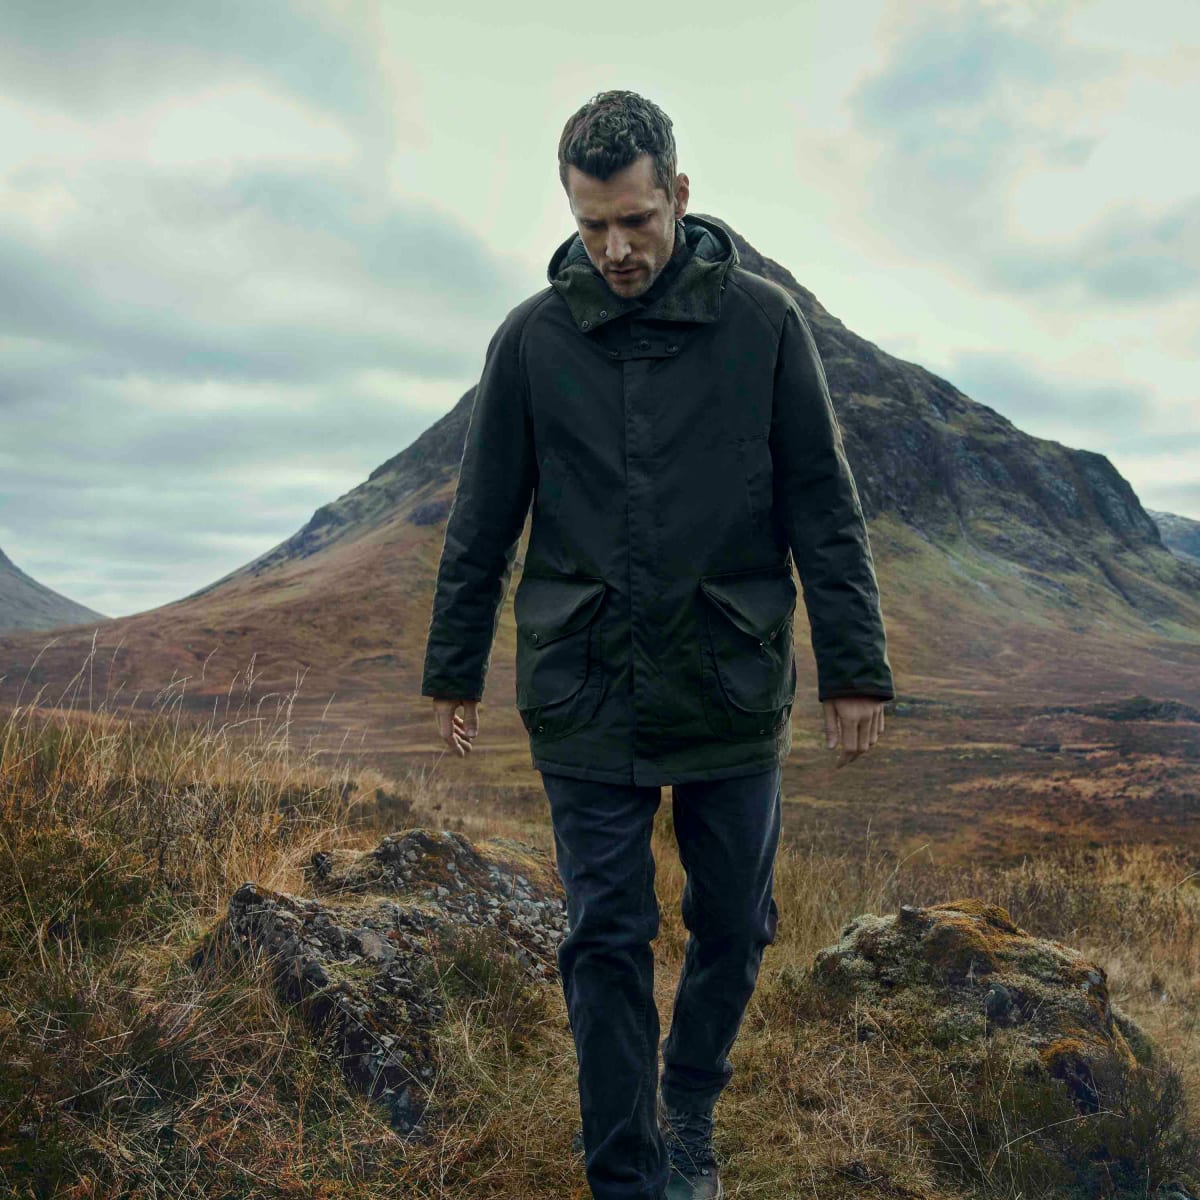 Barbour previews its new Gold Standard brand - Acquire